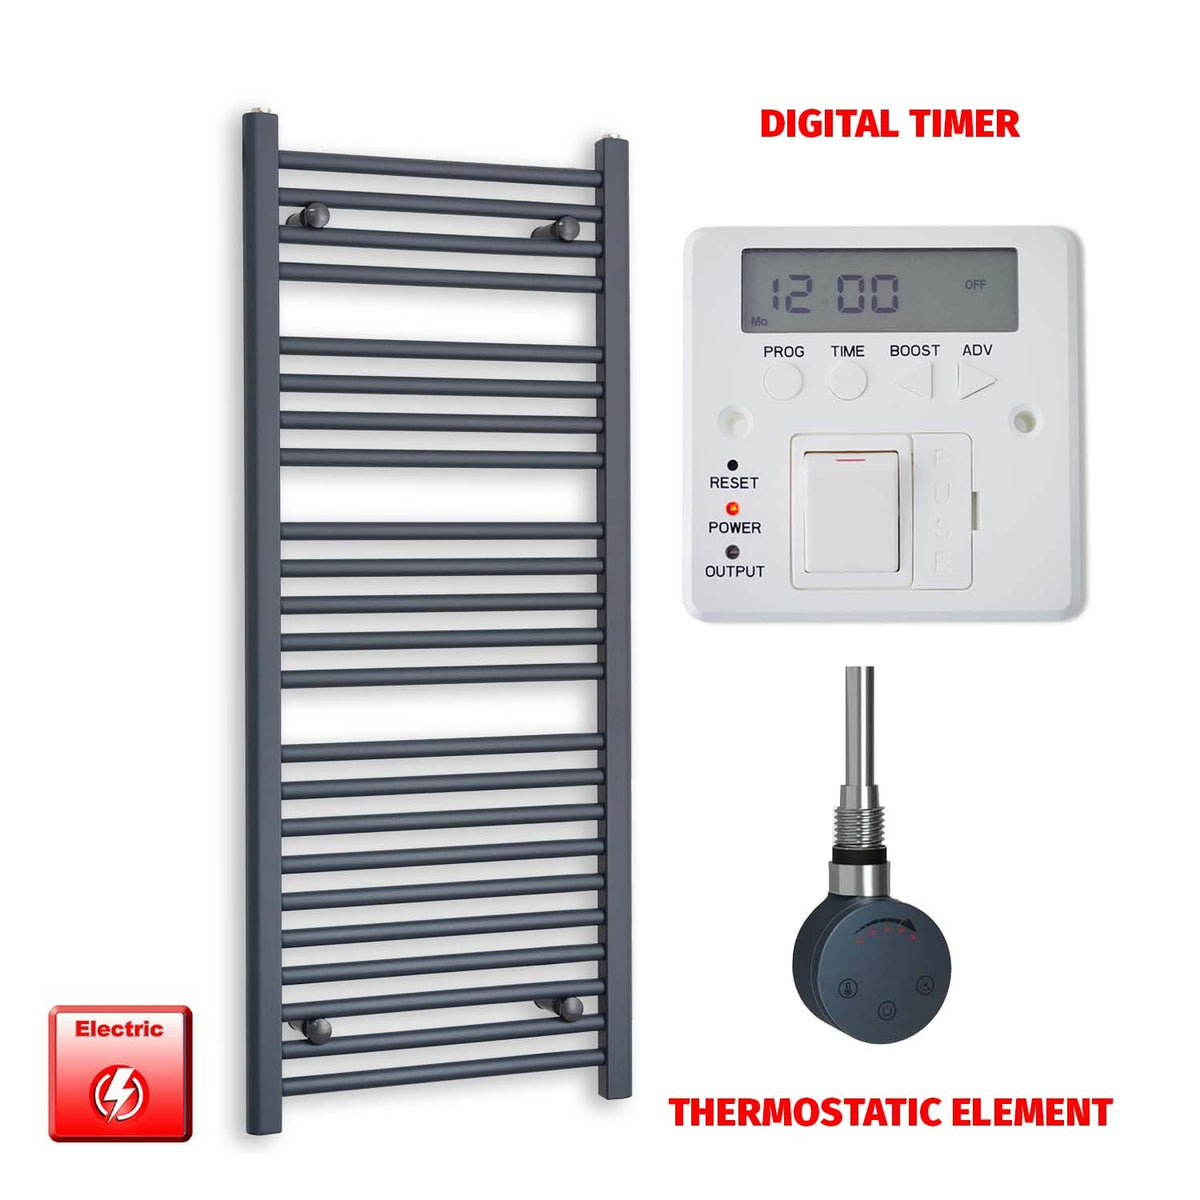 1200mm High 500mm Wide Flat Anthracite Pre-Filled Electric Heated Towel Rail Radiator HTR SMR Thermostatic element Digital timer